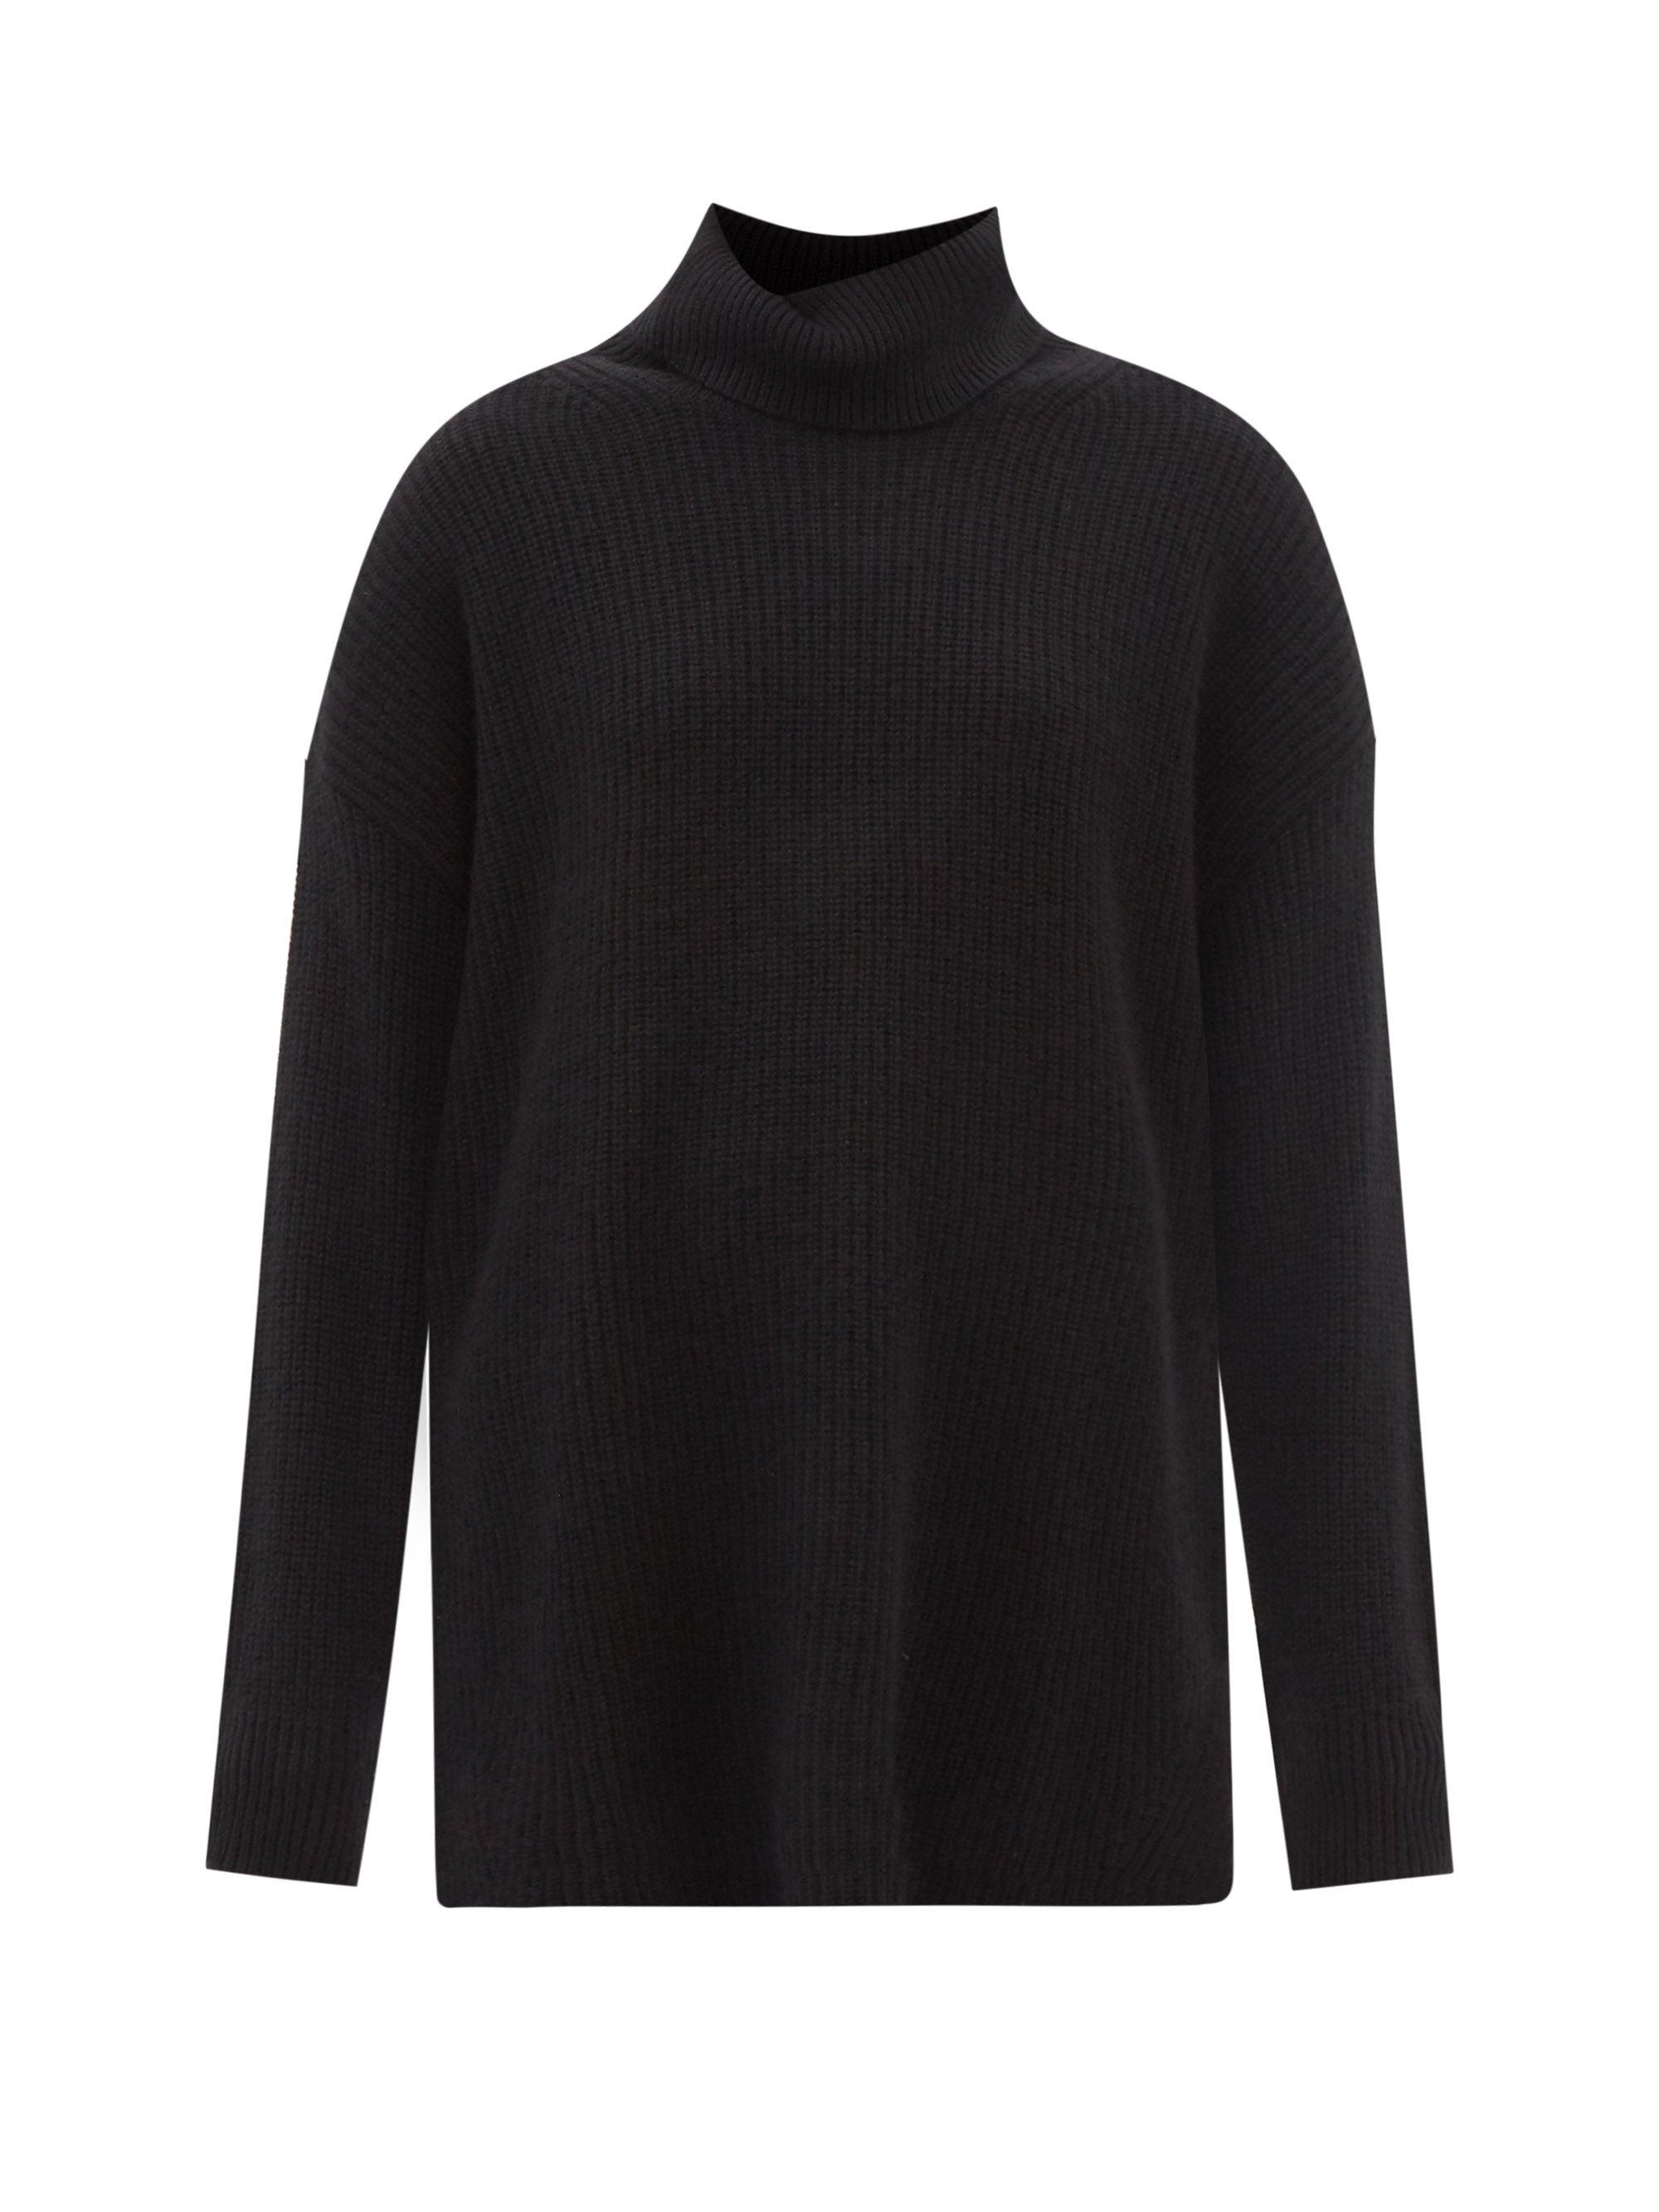 Lisa Yang Marley Roll-neck Cashmere Sweater in Black | Lyst